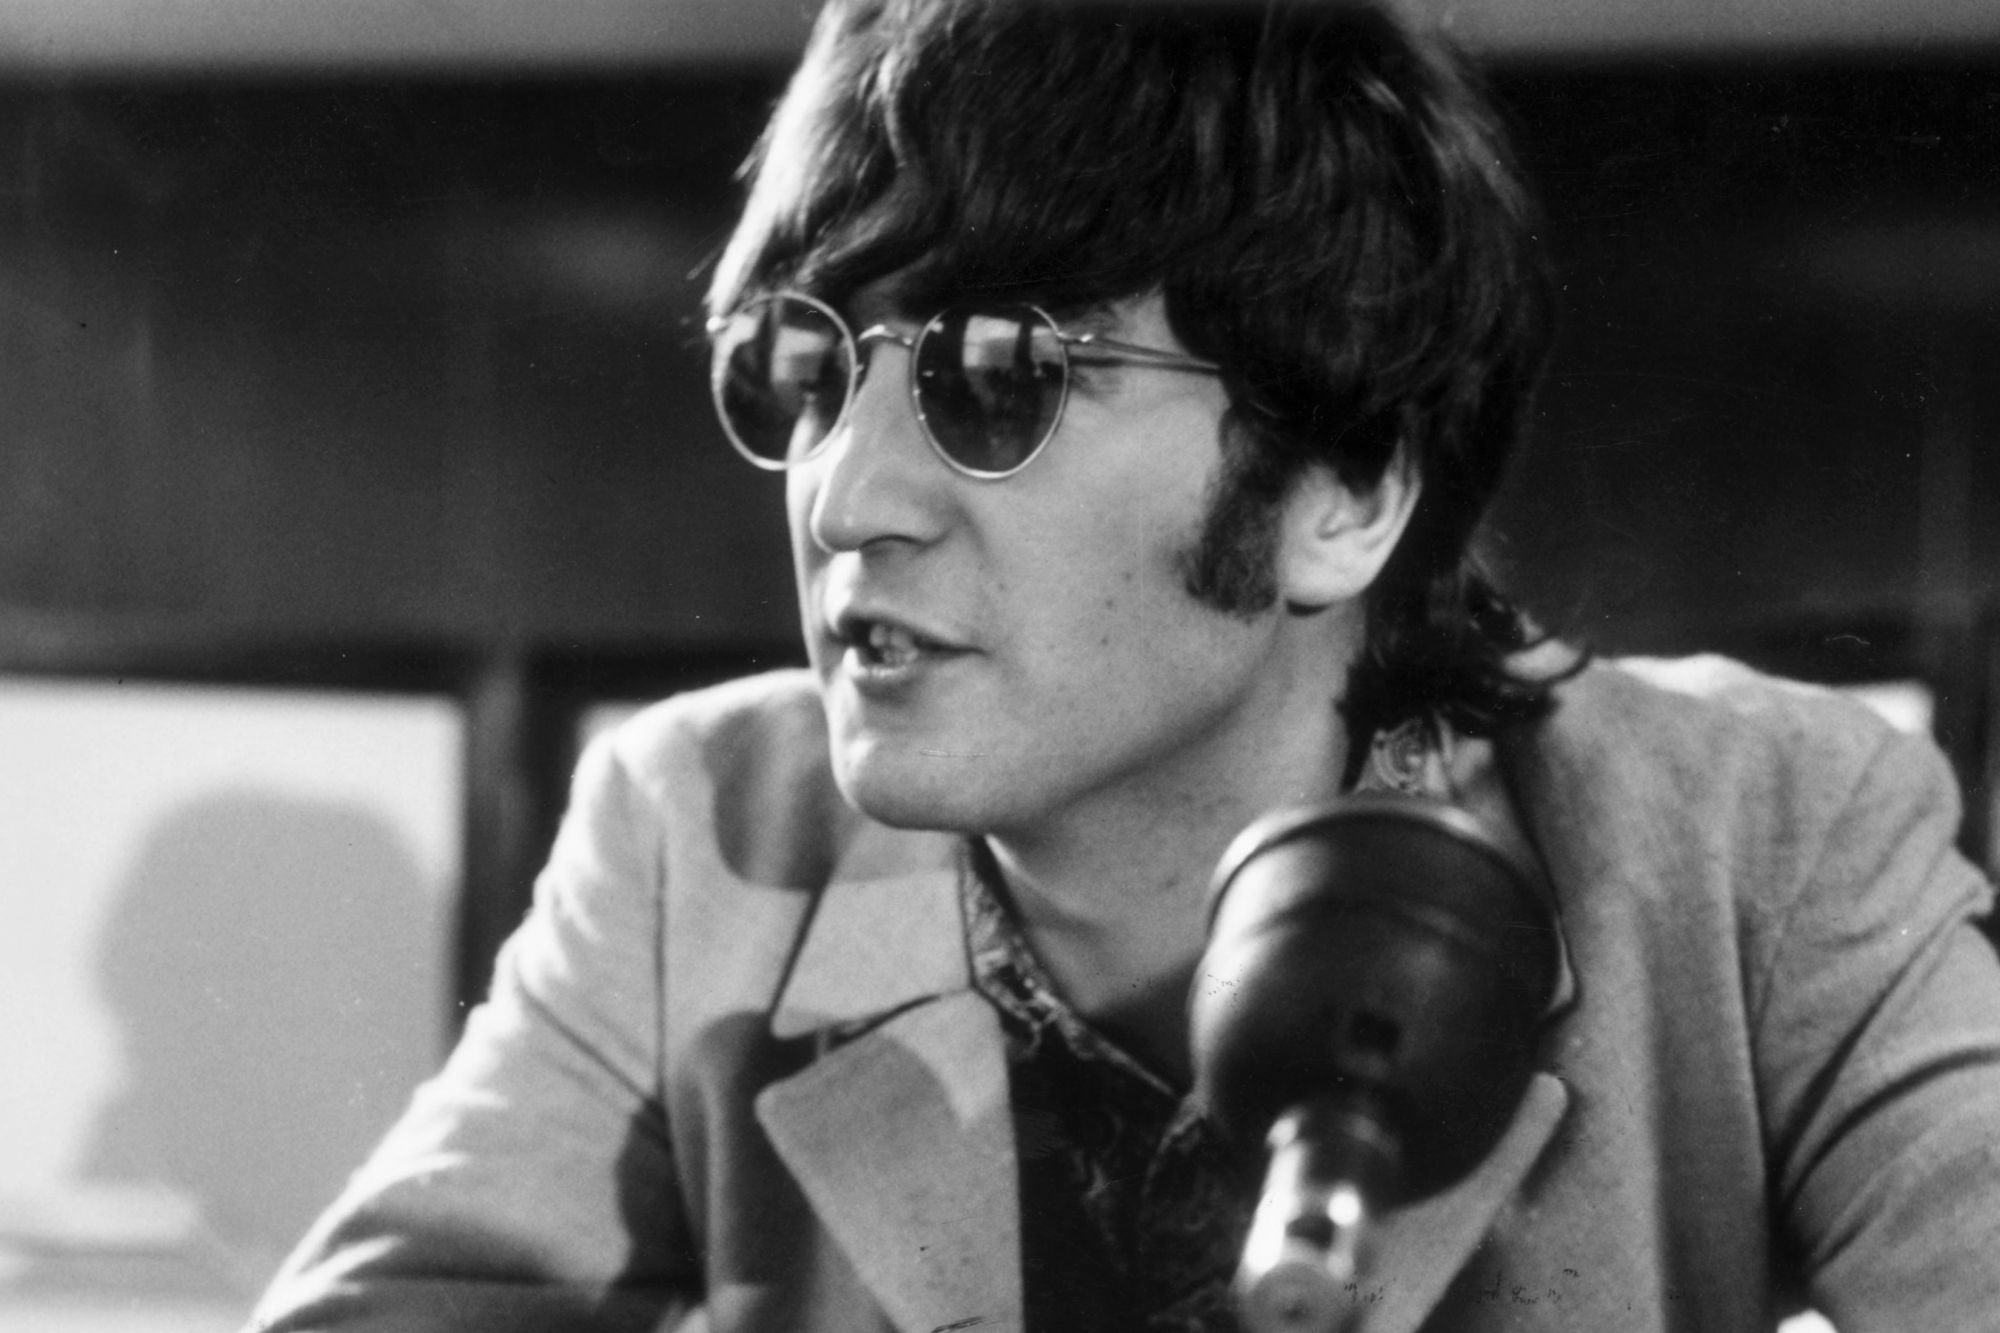 Remembering the Legend: John Lennon, 43 Years After His Passing